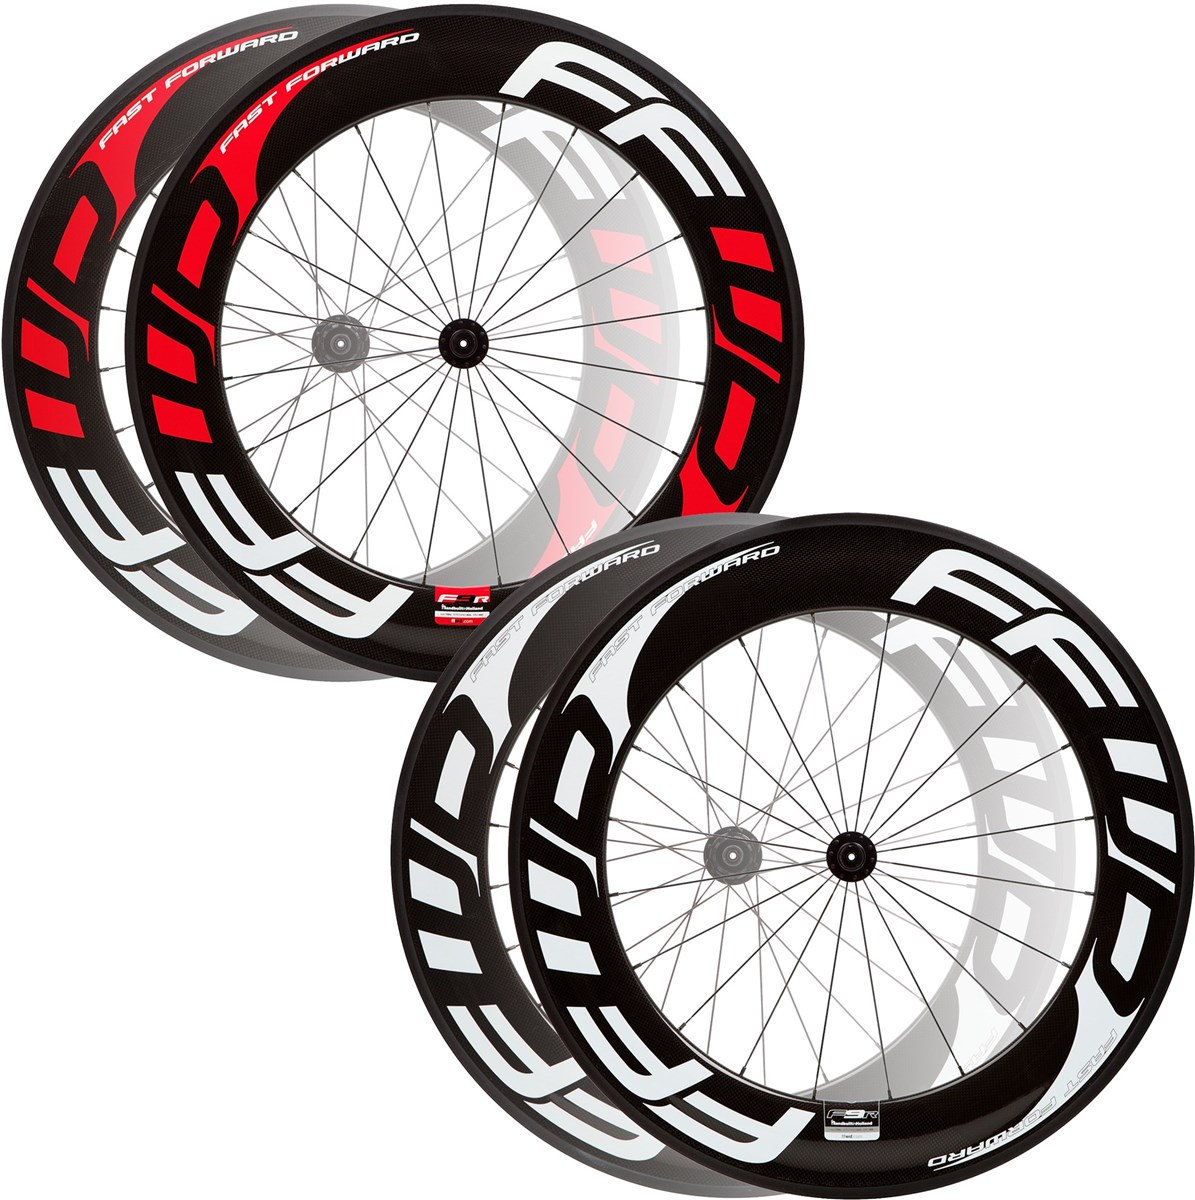 Fast Forward F9R Full Carbon Clincher DT180 Road Wheelset product image